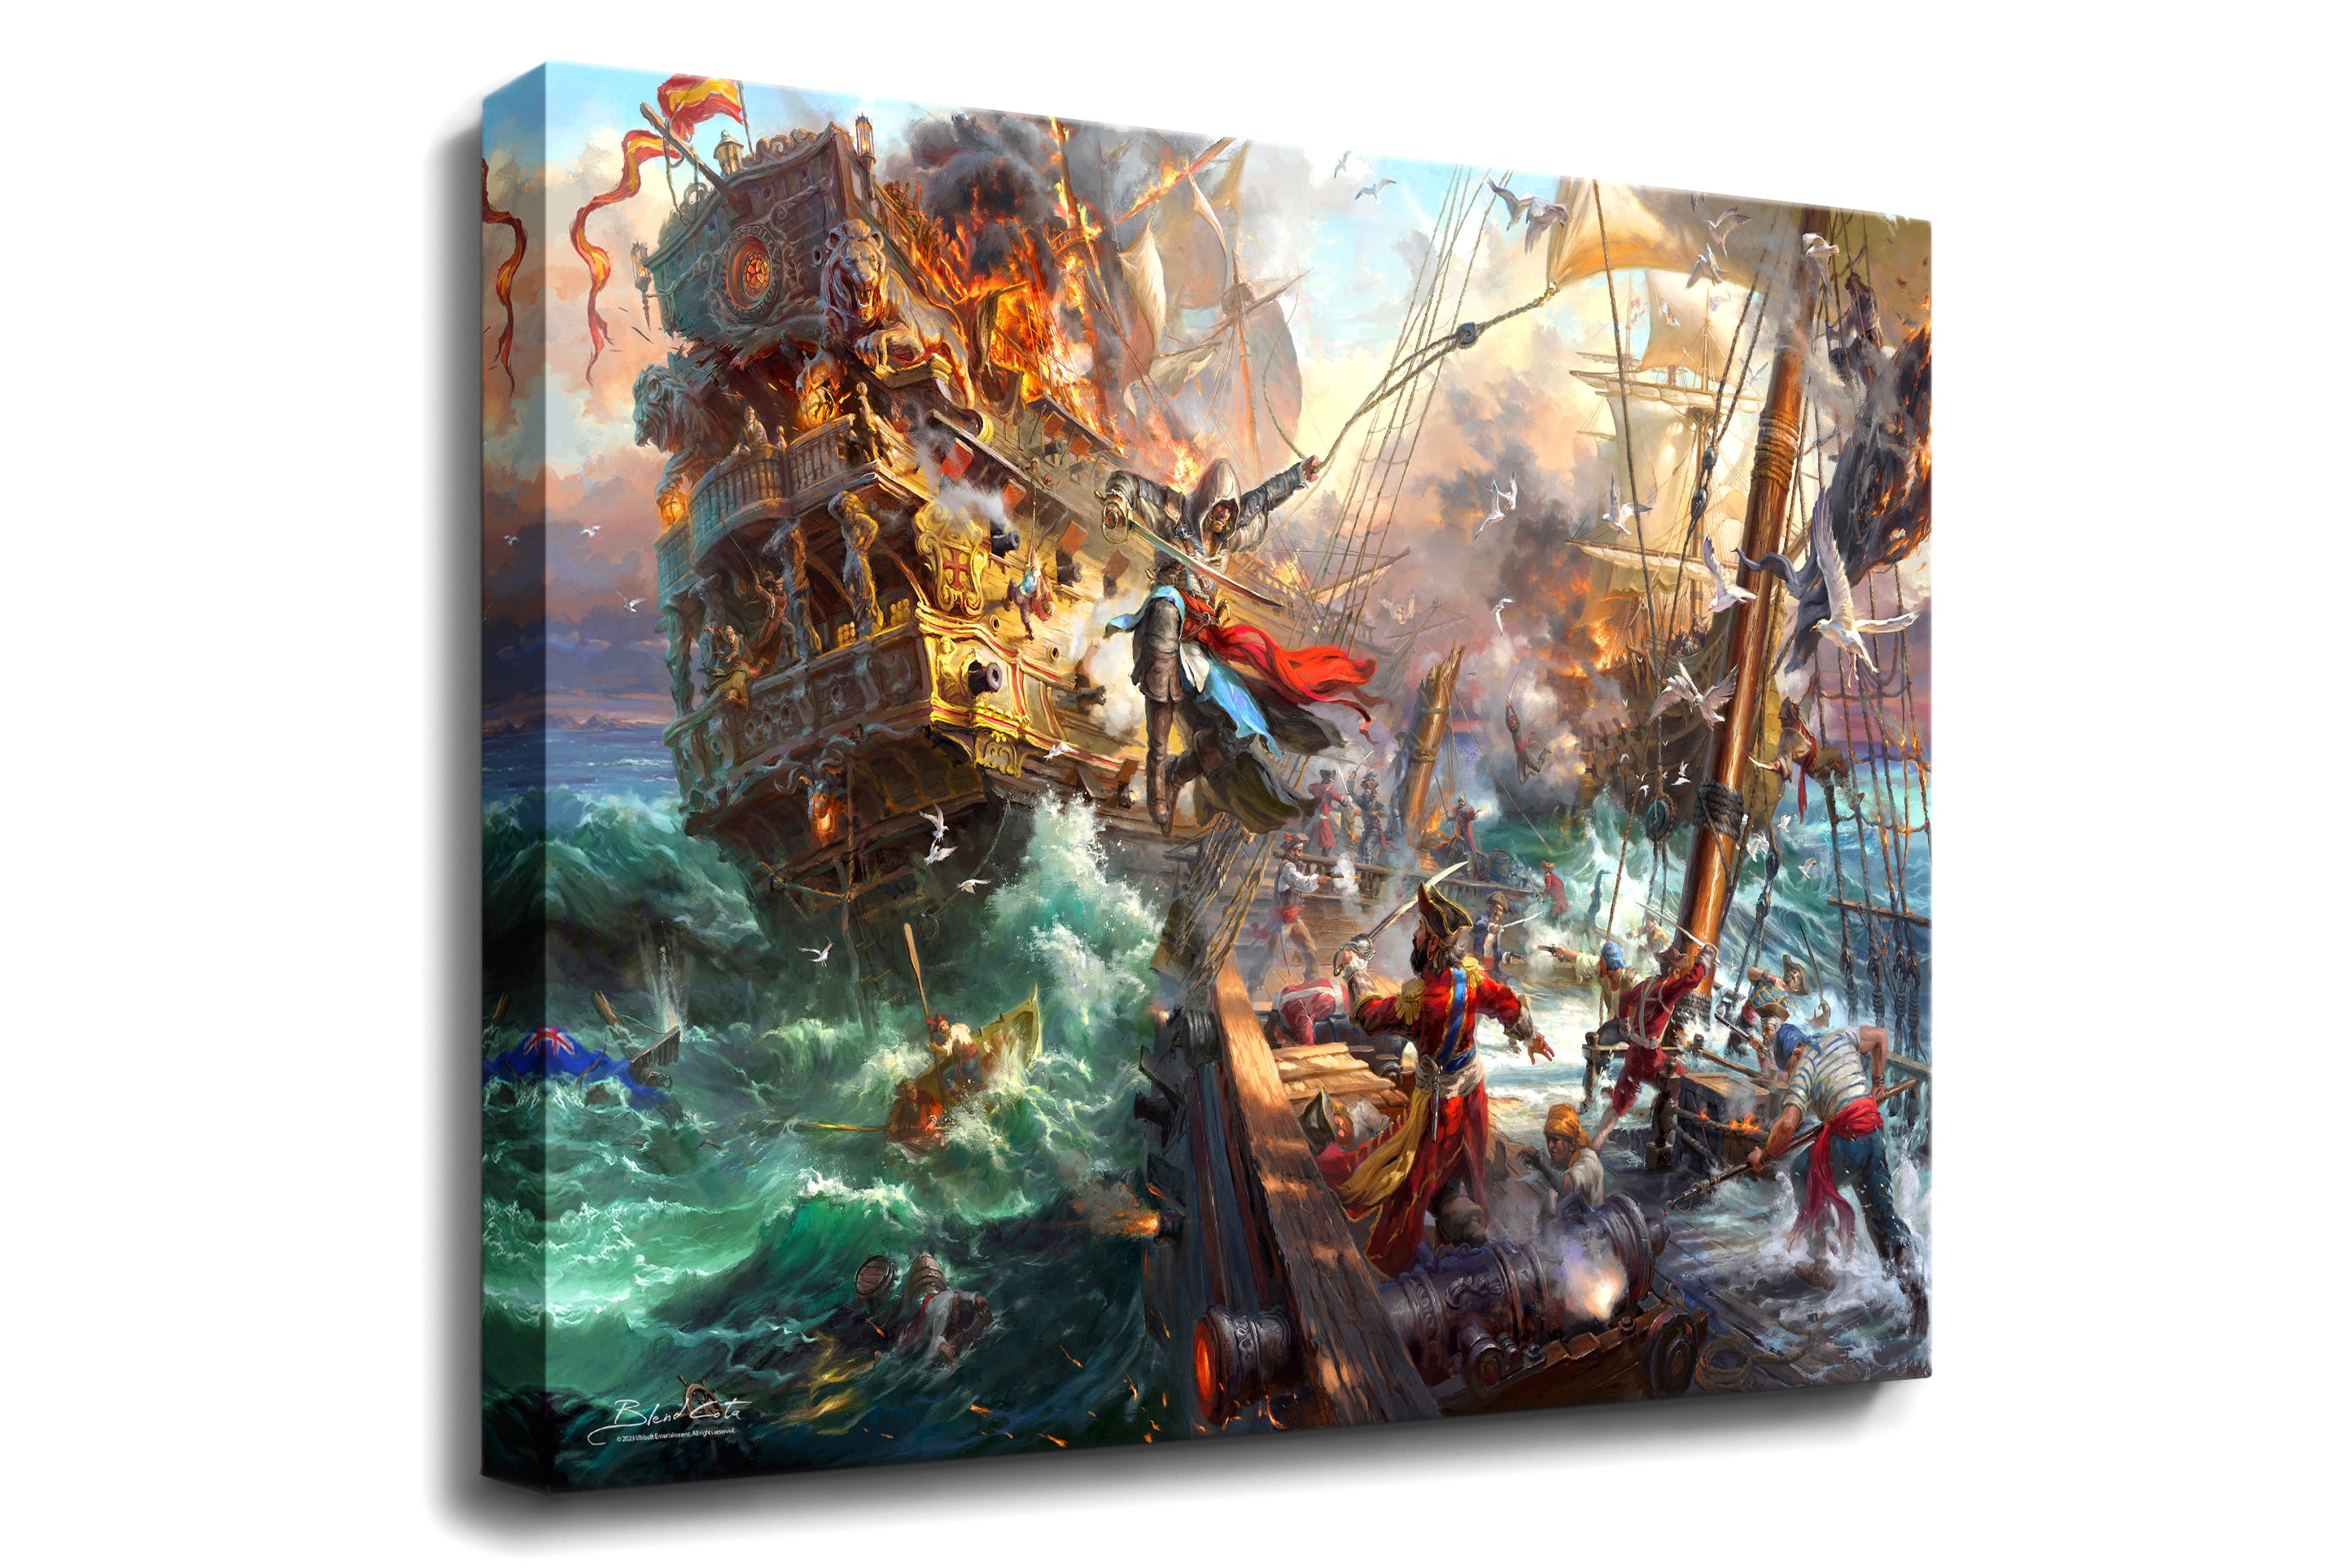 
                  
                    Art print on gallery wrapped canvas of Assassin's Creed Black Flag and Edward Kenway meticulously designed and painted with intricate details in a realistic style.
                  
                